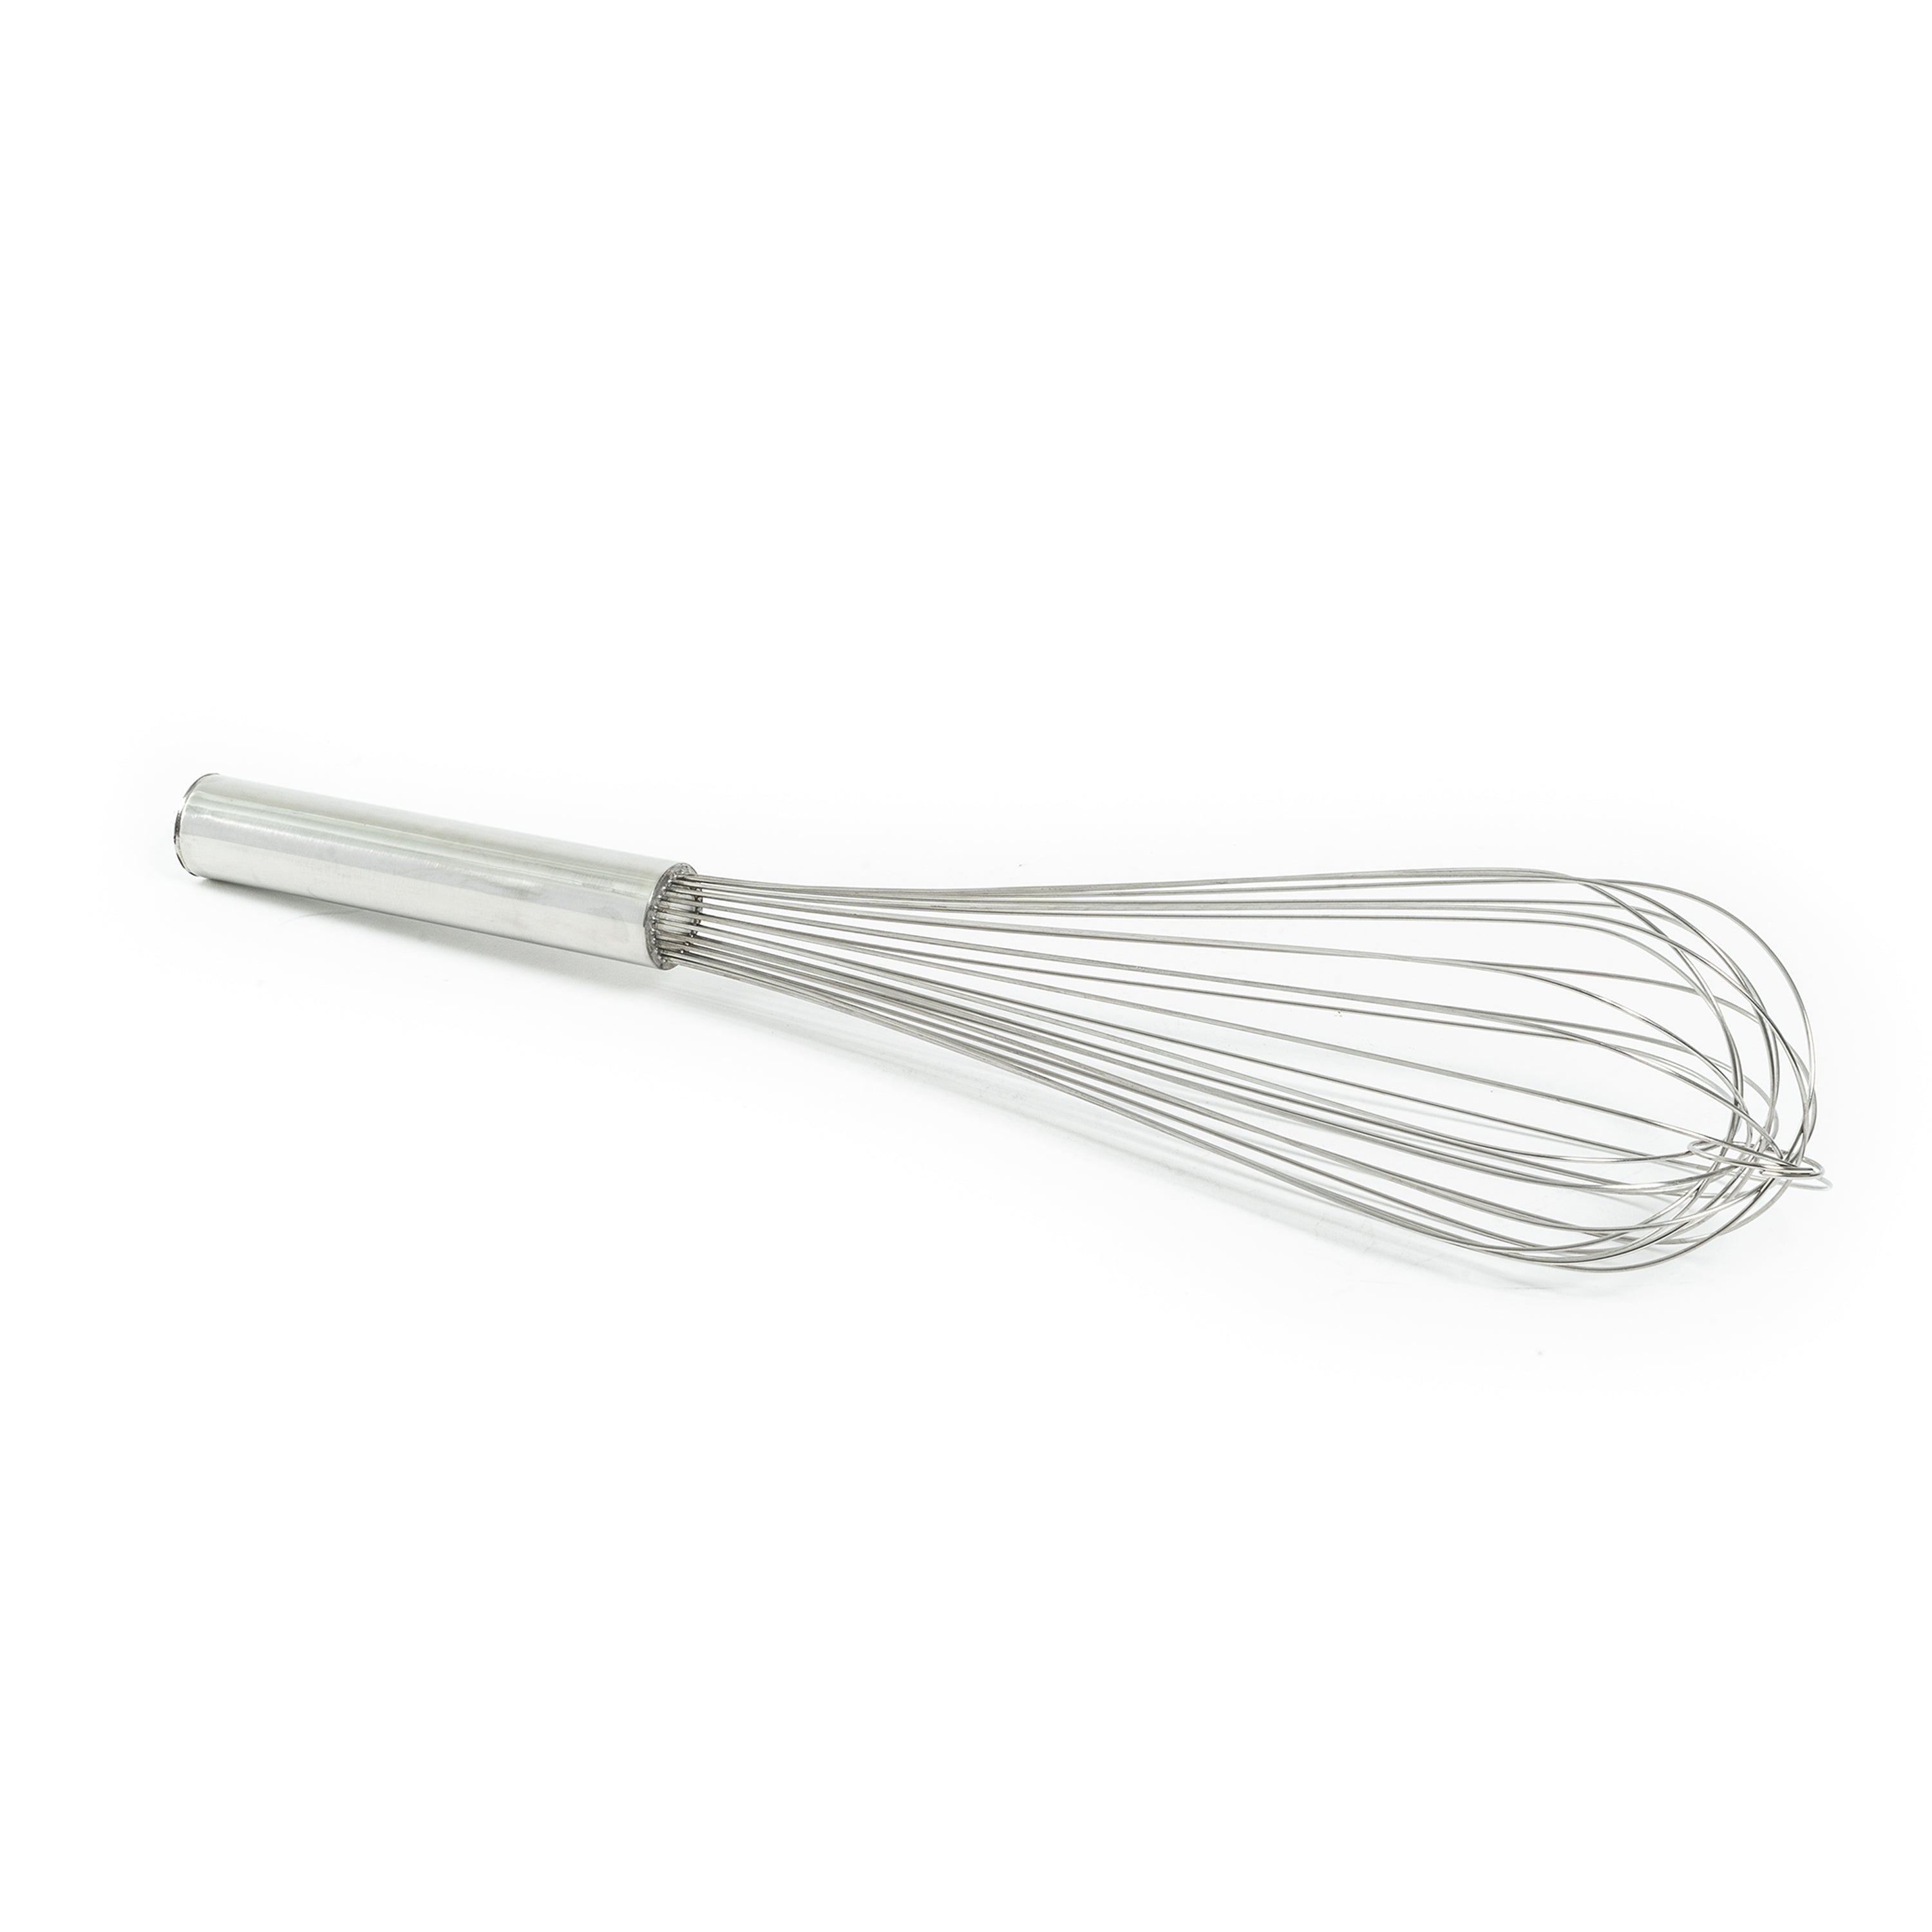 Adcraft PWE-18 Piano Whip / Whisk